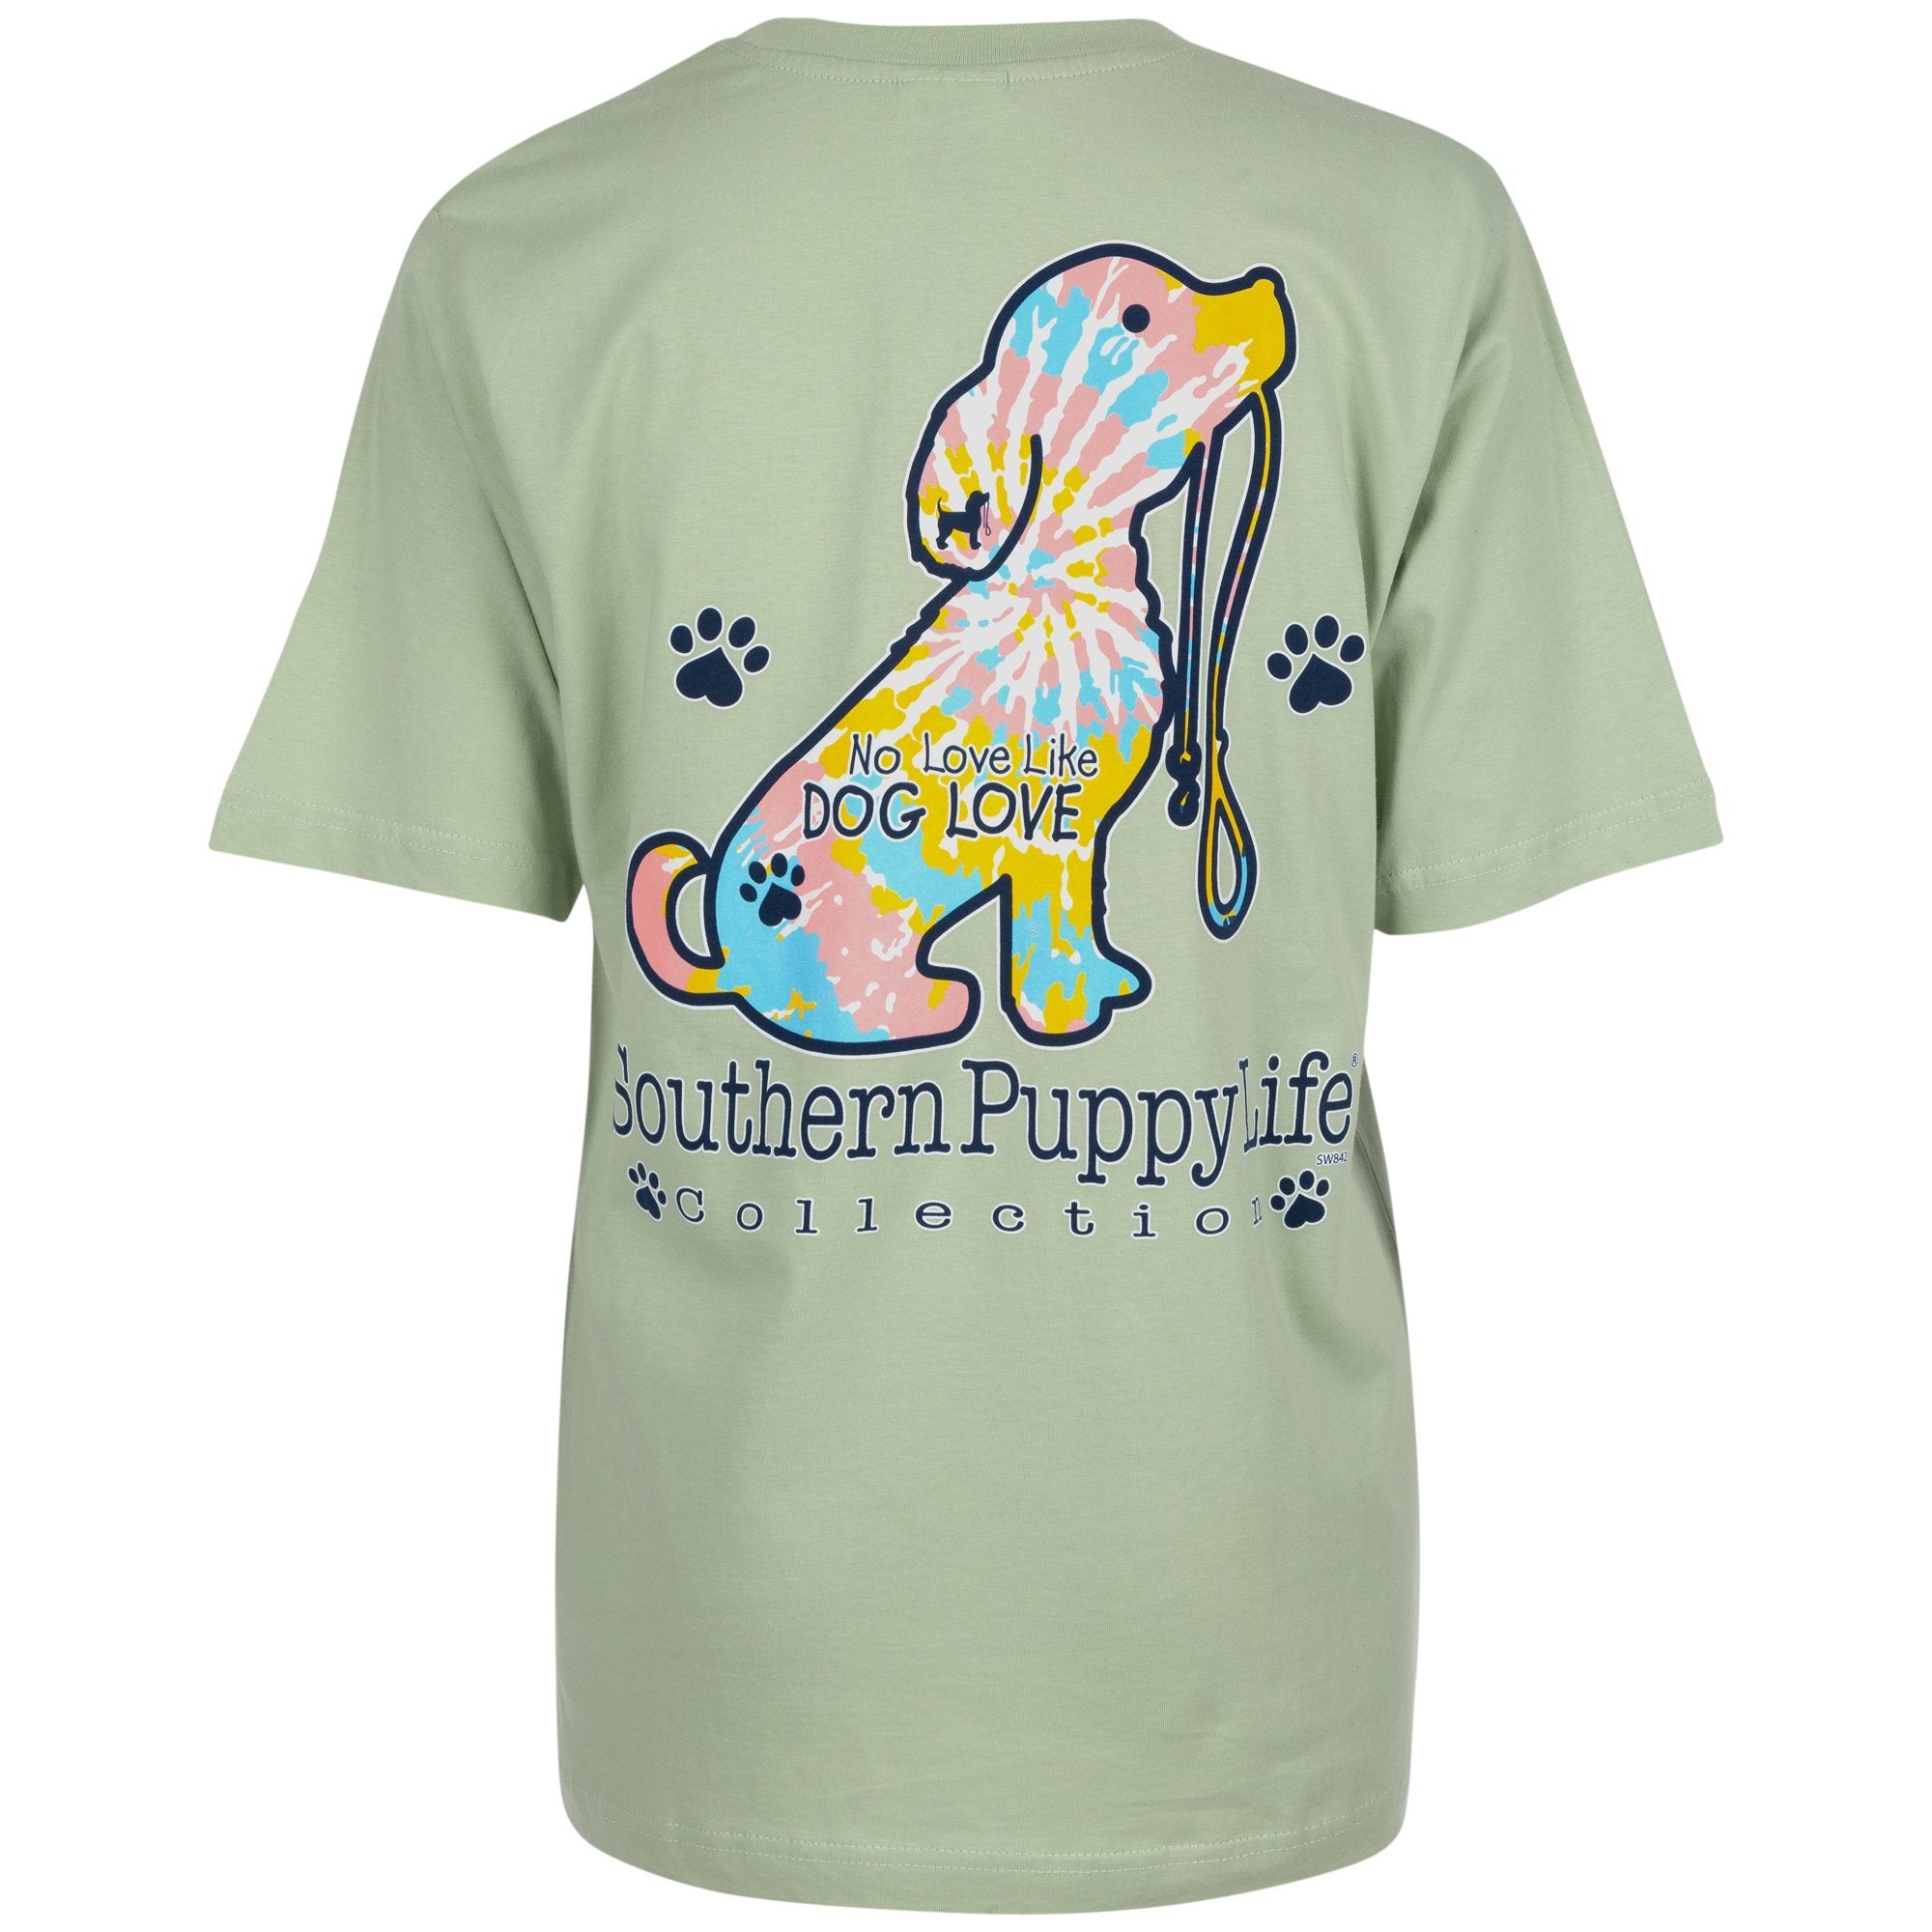 Southern Puppy Life® TShirt The Animal Rescue Site